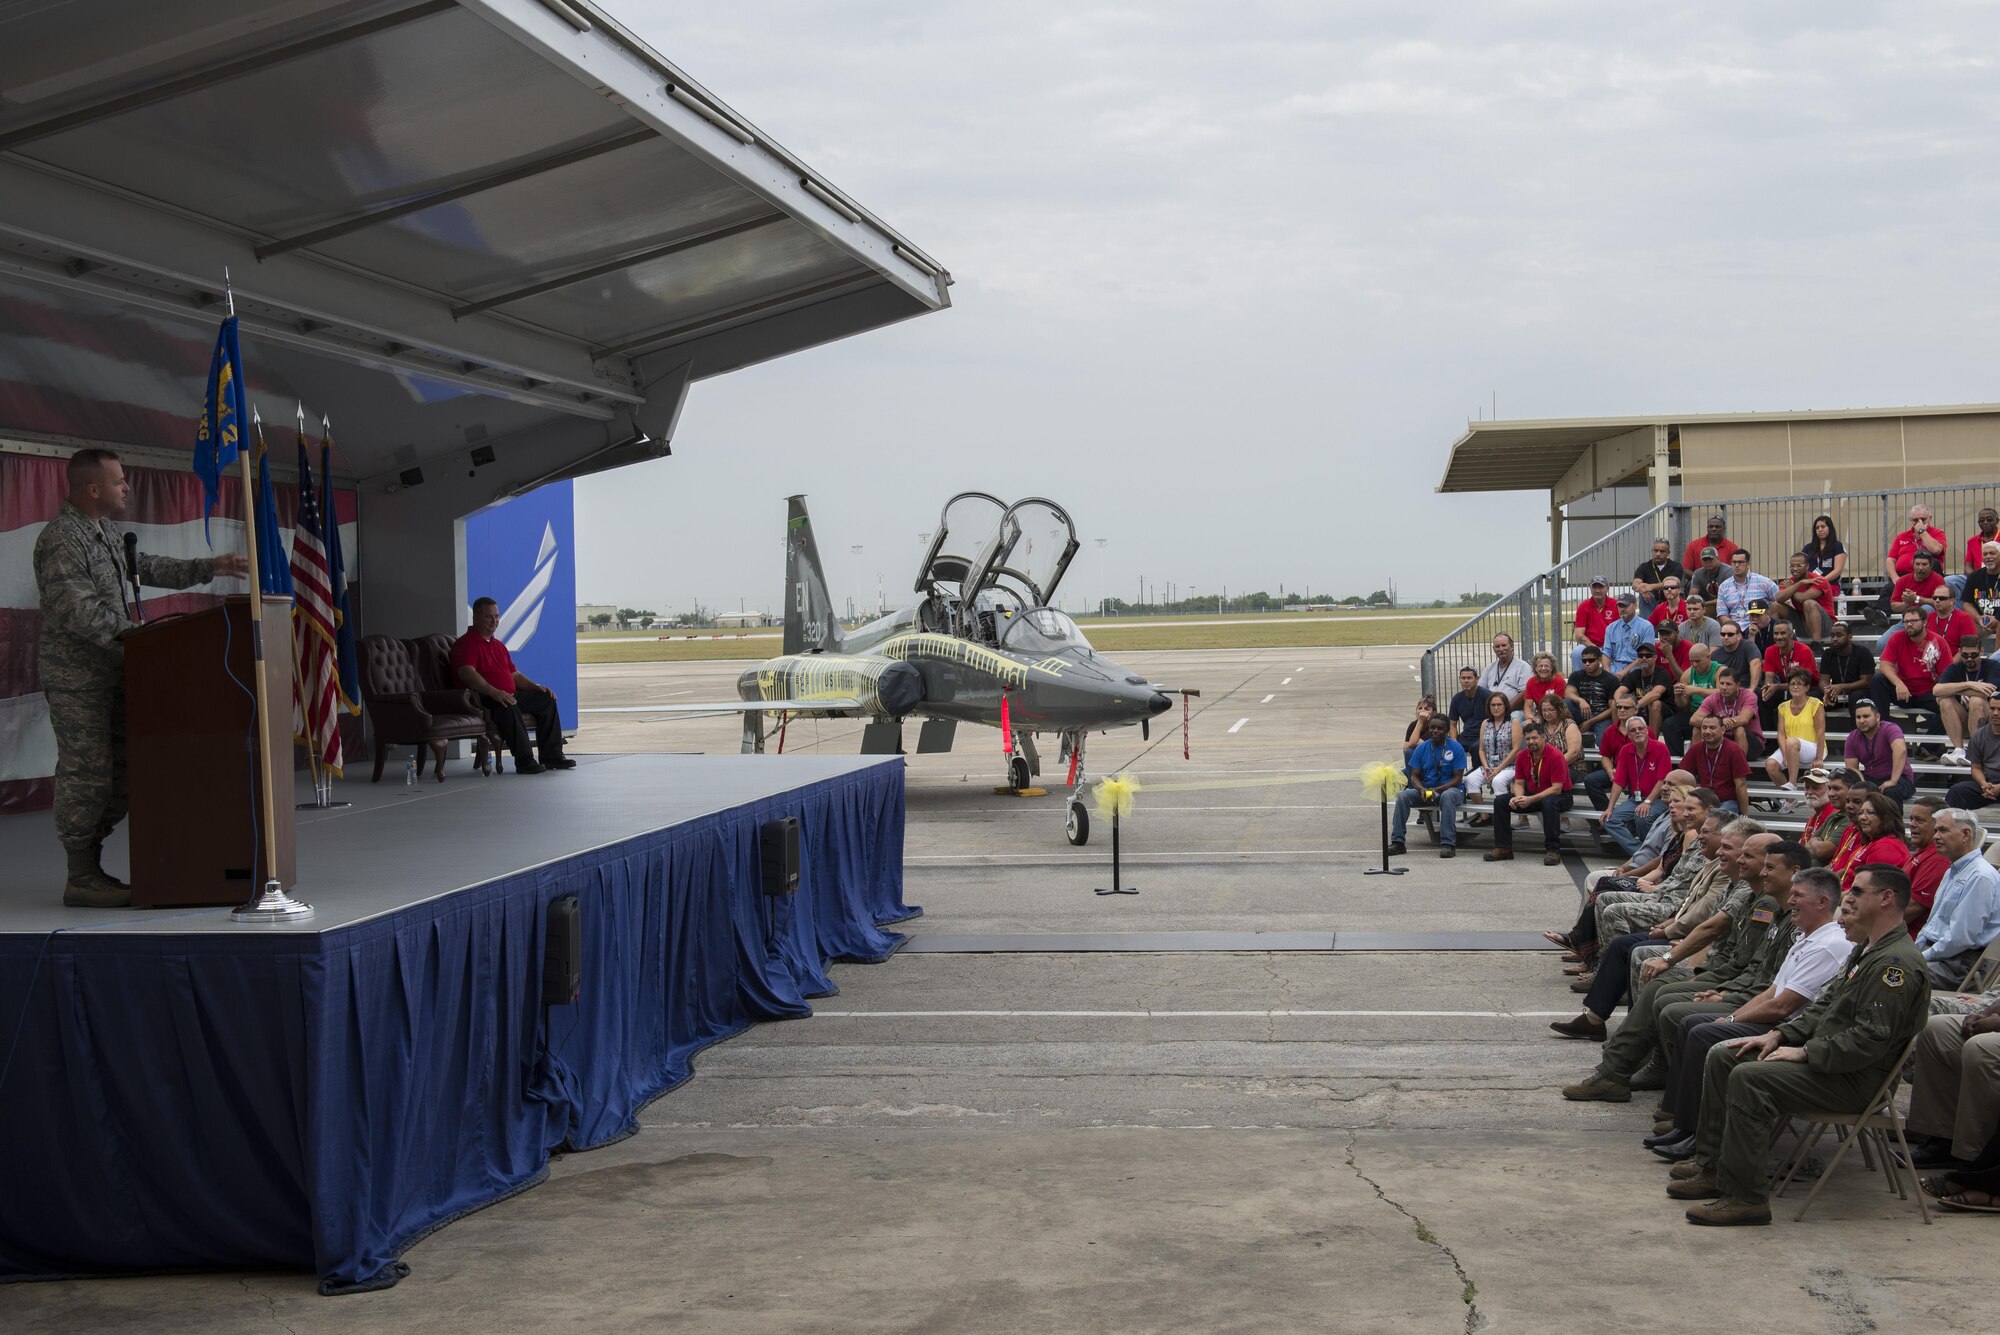 Brig. Gen. Carl Buhler, Ogden Air Logistics Complex commander, Hill Air Force Base, Utah, speaks during the unveiling of the first T-38 from the Pacer Classic III program July 31, 2015, at Joint Base San Antonio-Randolph, Texas. Pacer Classic III represents the largest single structural modification ever undertaken on the T-38 aircraft and will extend the service life of the modified aircraft by 15-20 years. (U.S. Air Force photo by Airman 1st Class Stormy Archer)